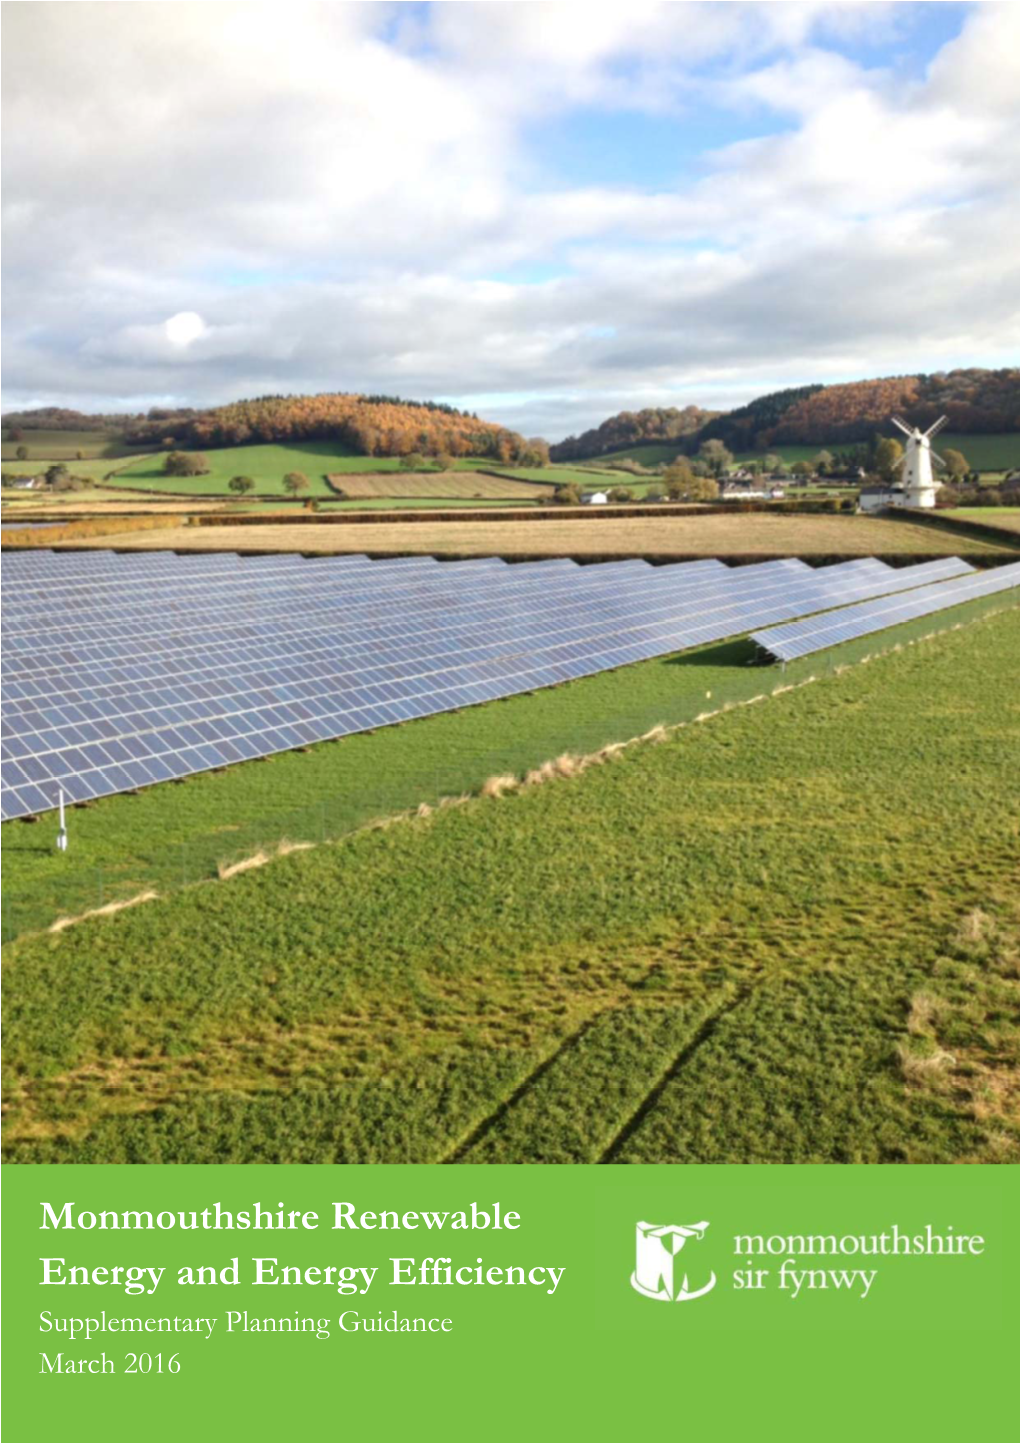 Monmouthshire Renewable Energy and Energy Efficiency Supplementary Planning Guidance March 2016 Monmouthshire Renewable Energy and Energy Efficiency SPG